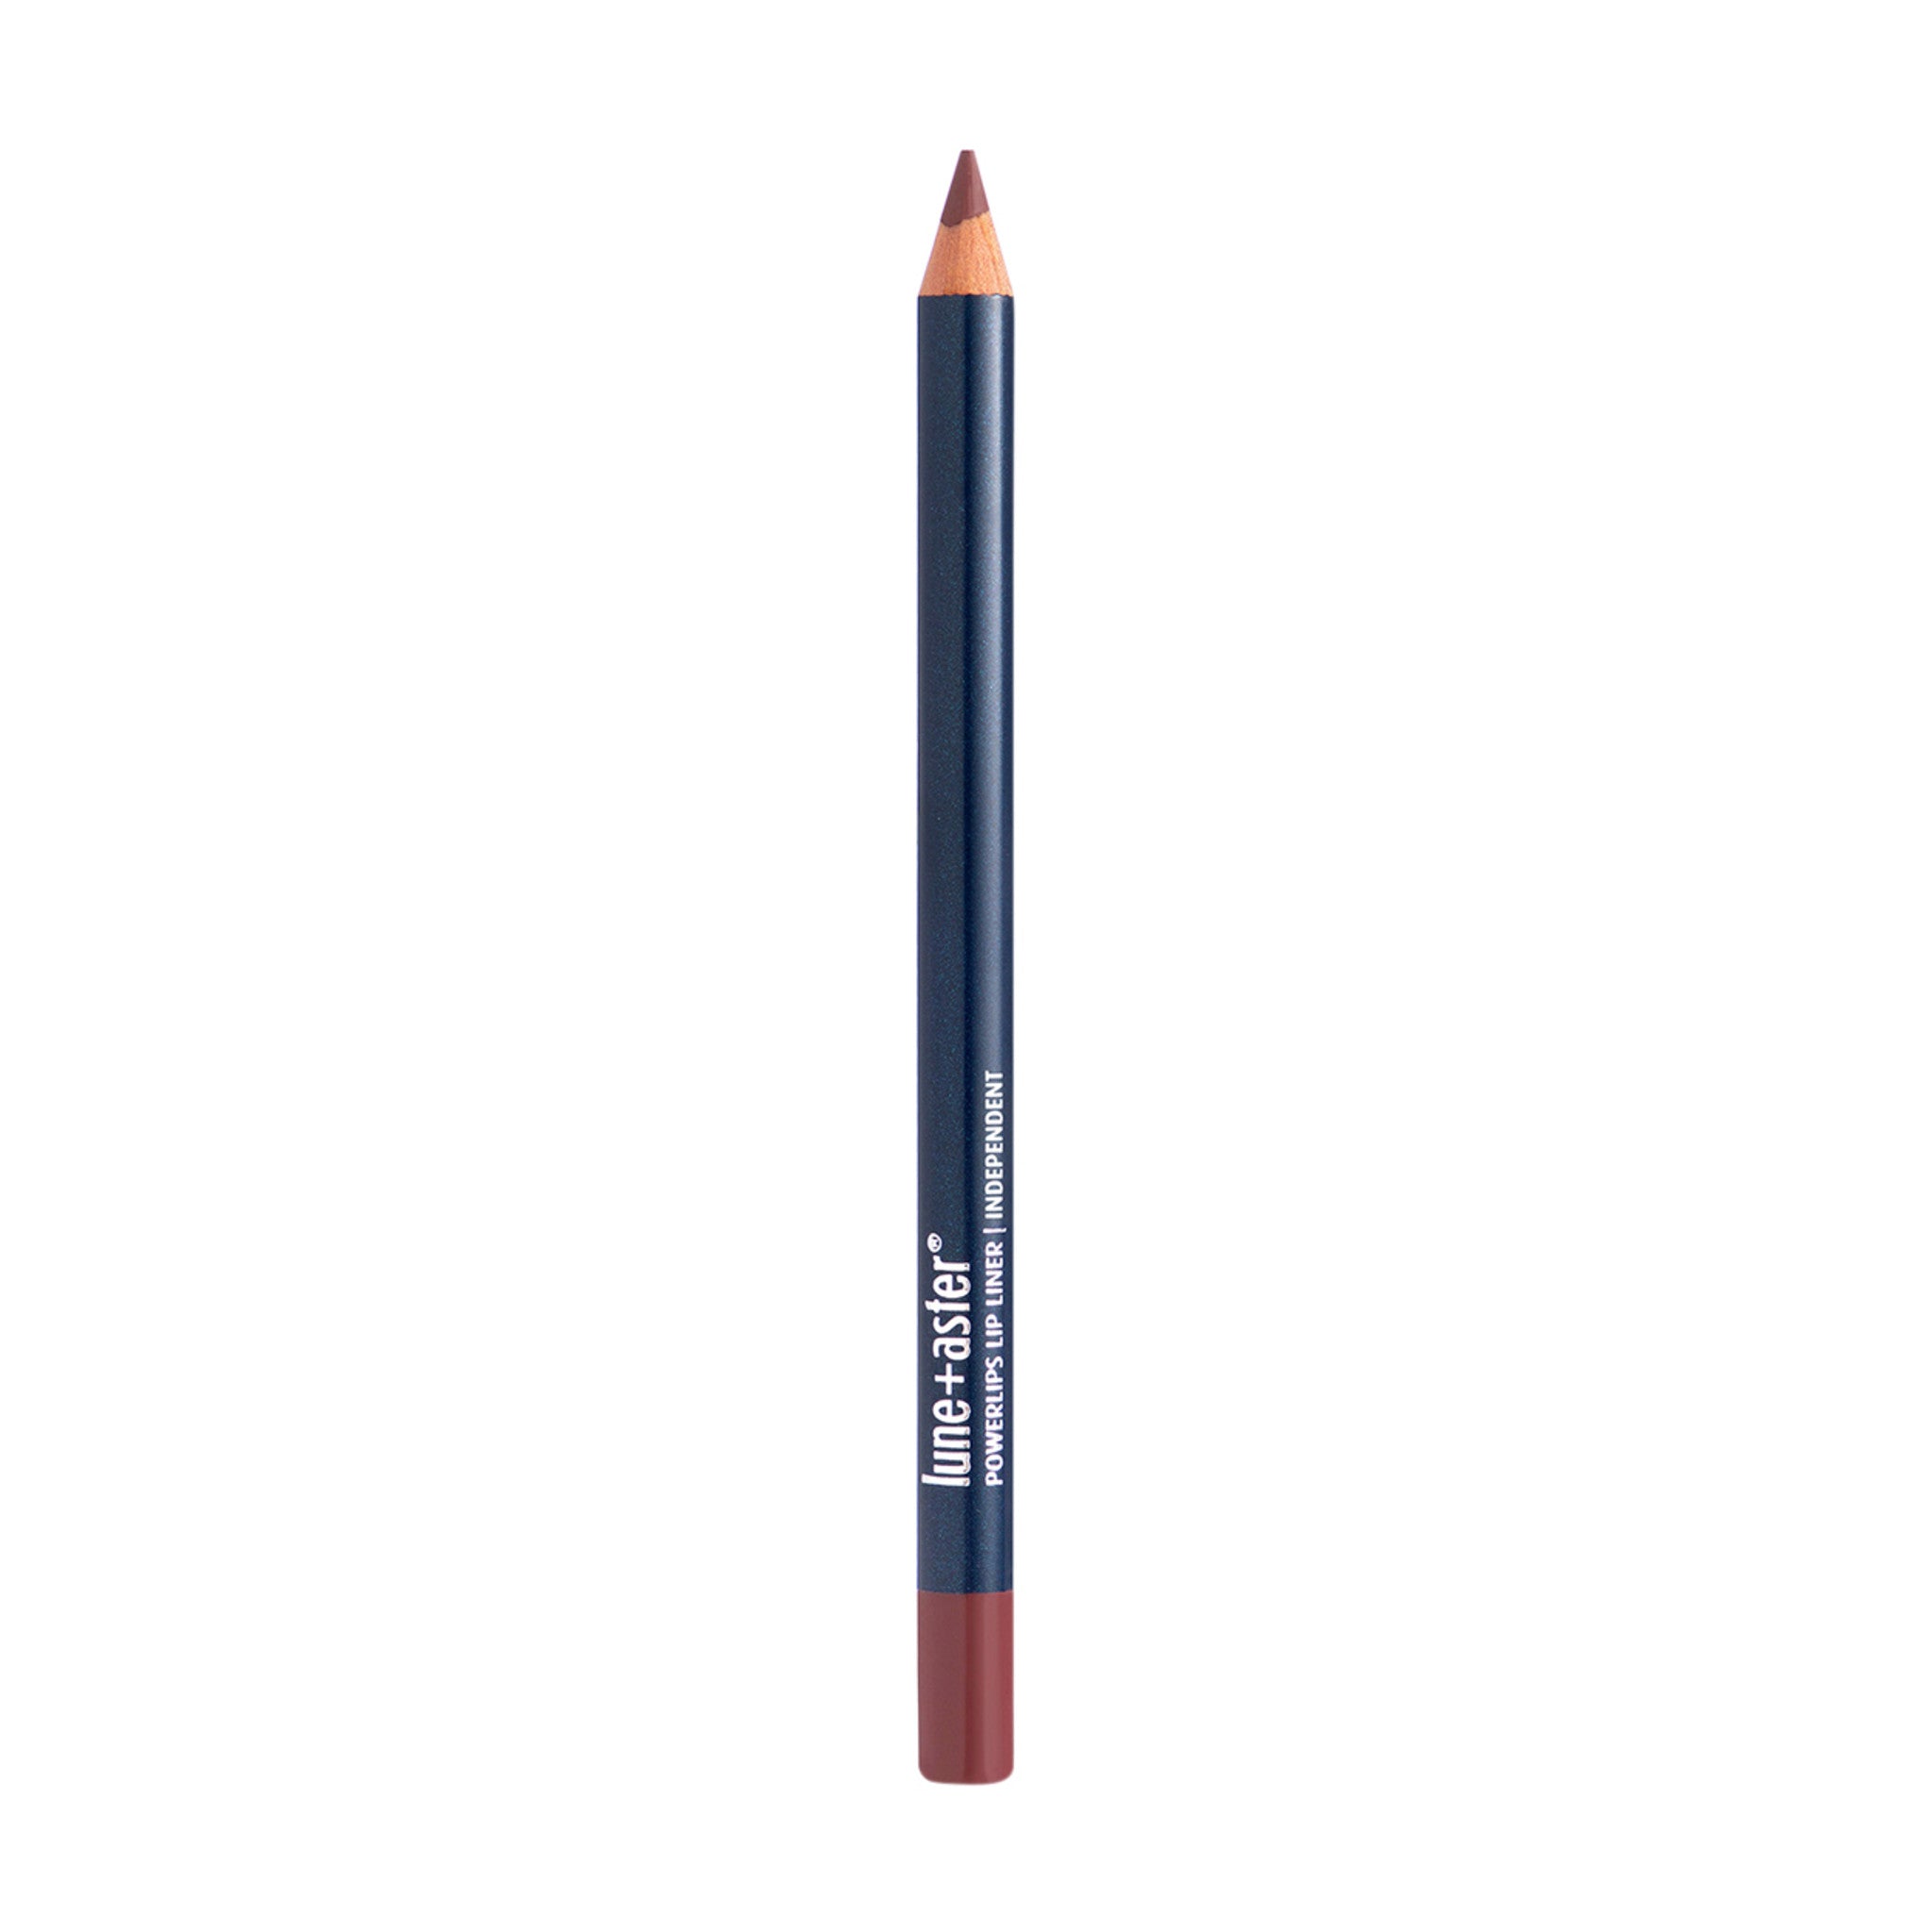 Lune+Aster PowerLips Lip Liner Color/Shade variant: Independent main image. This product is in the color nude